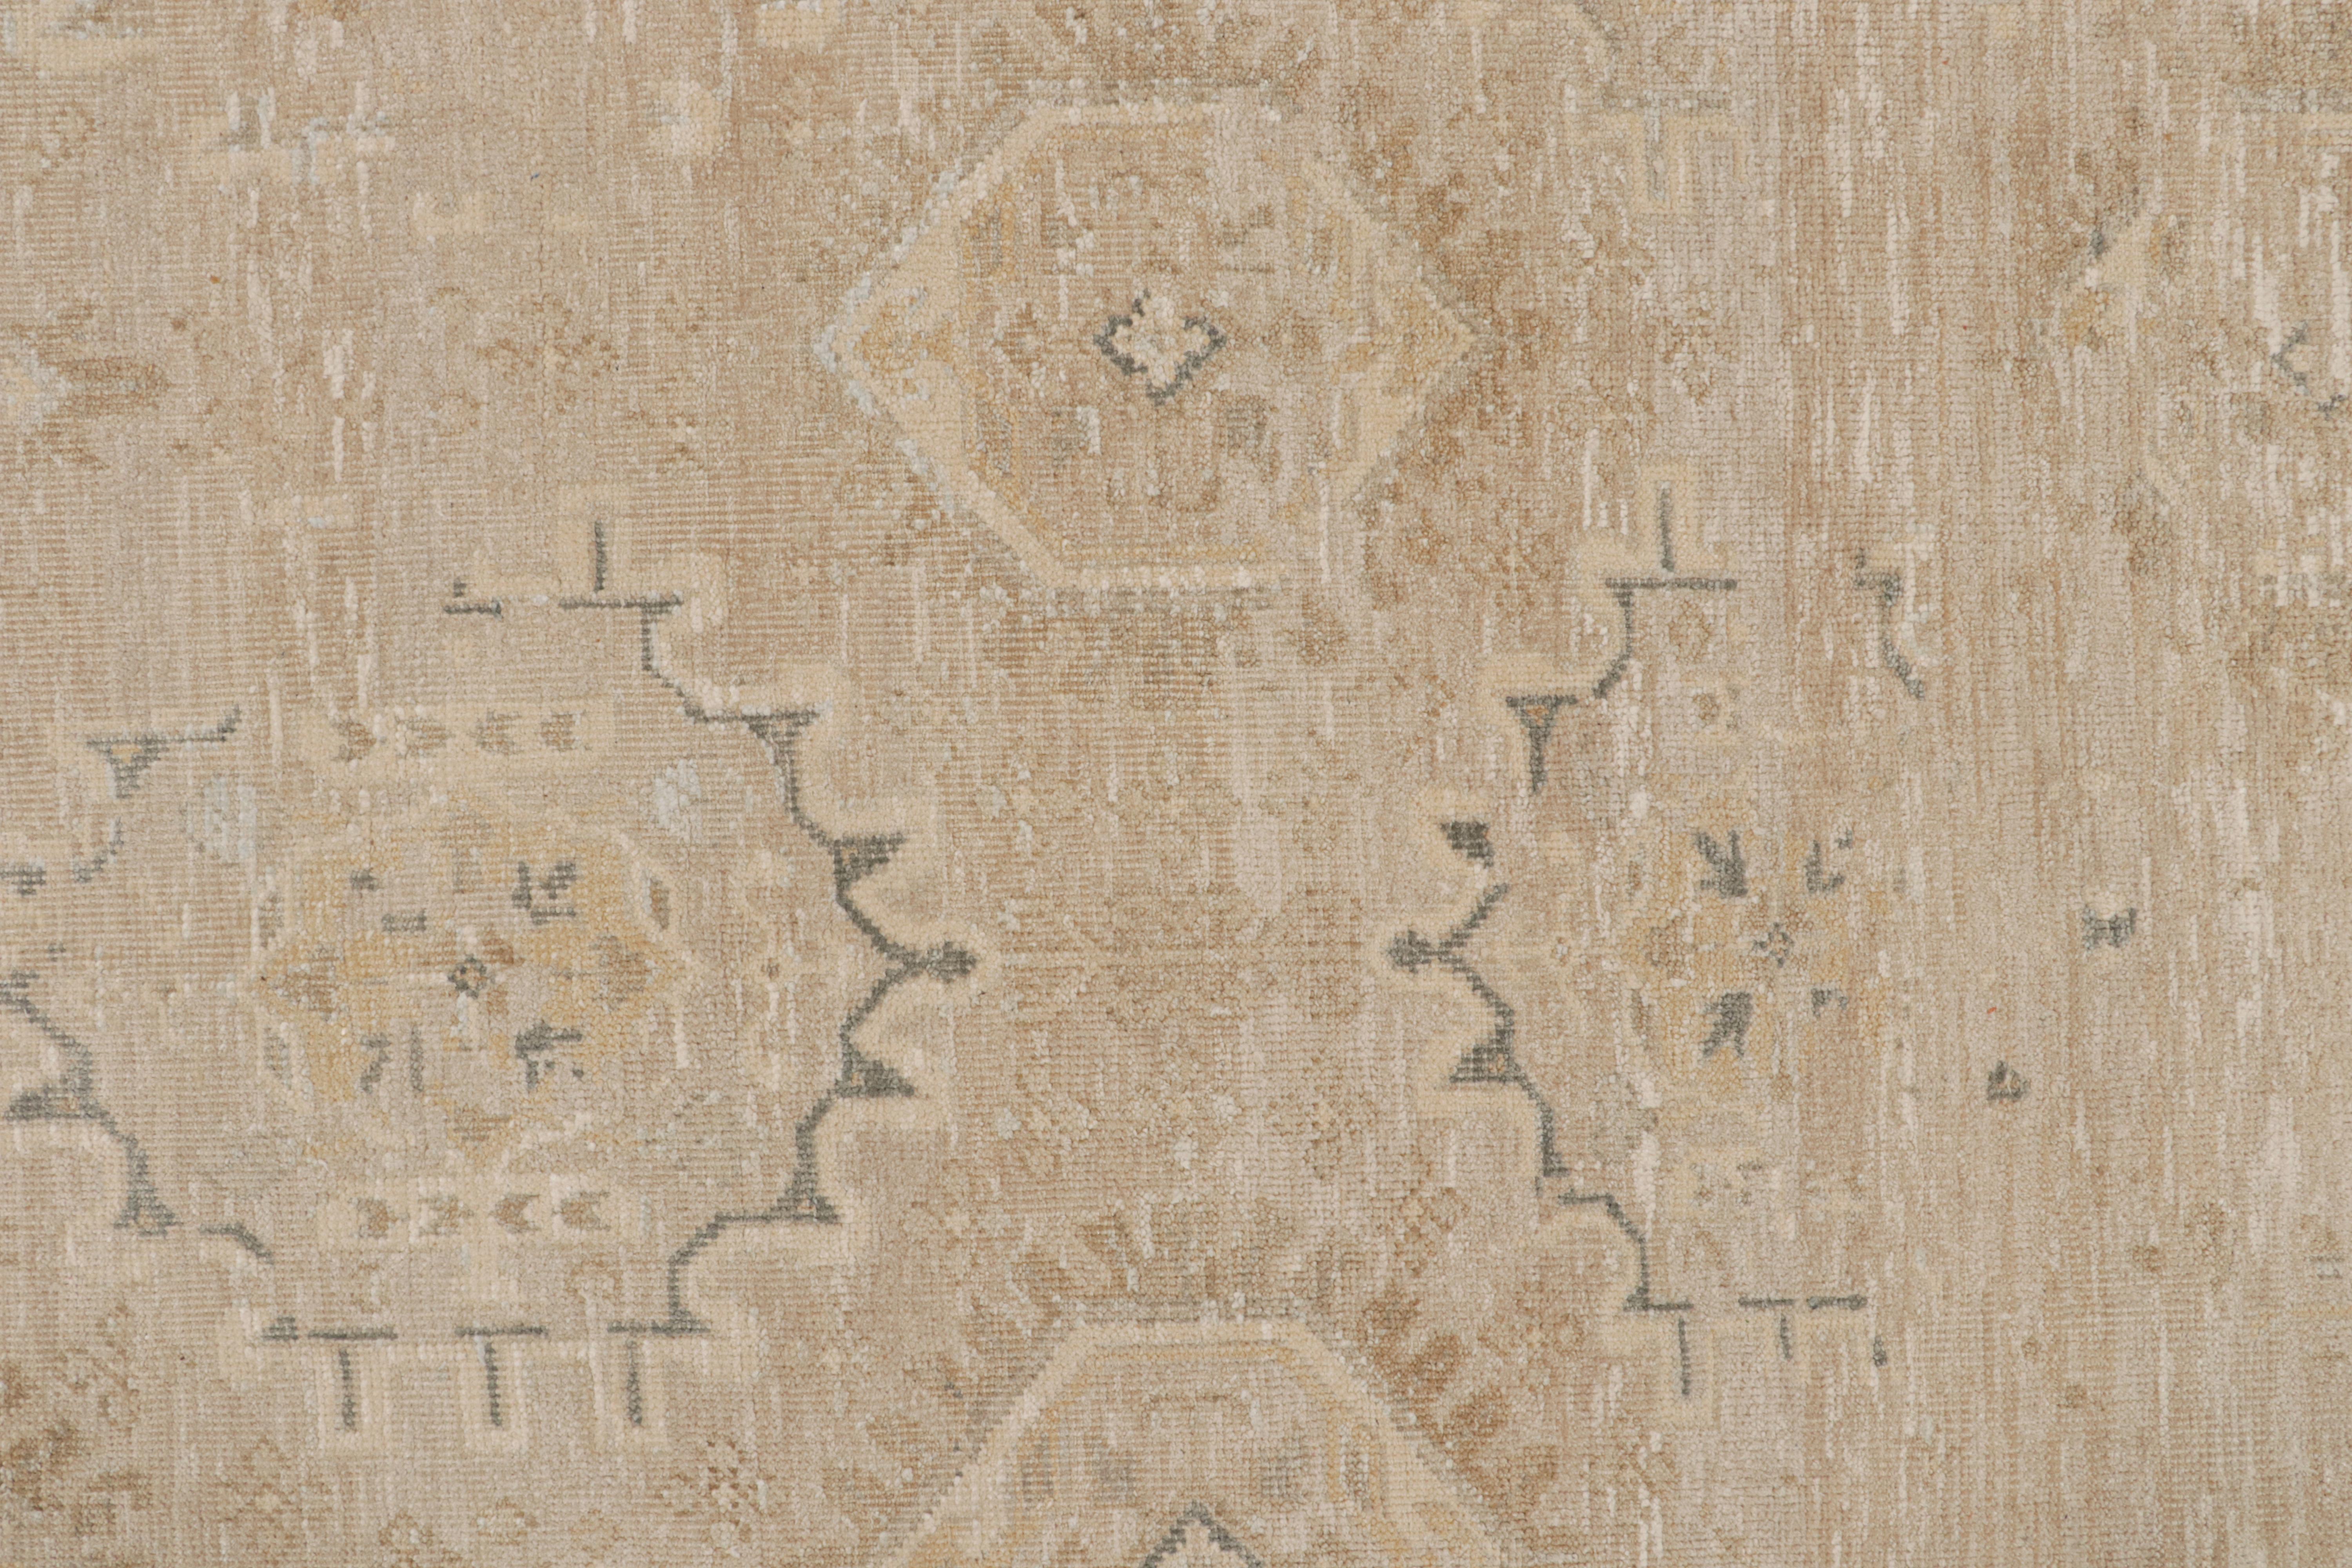 Contemporary Rug & Kilim’s Oushak Style Rug in Beige-Brown with Floral Patterns For Sale